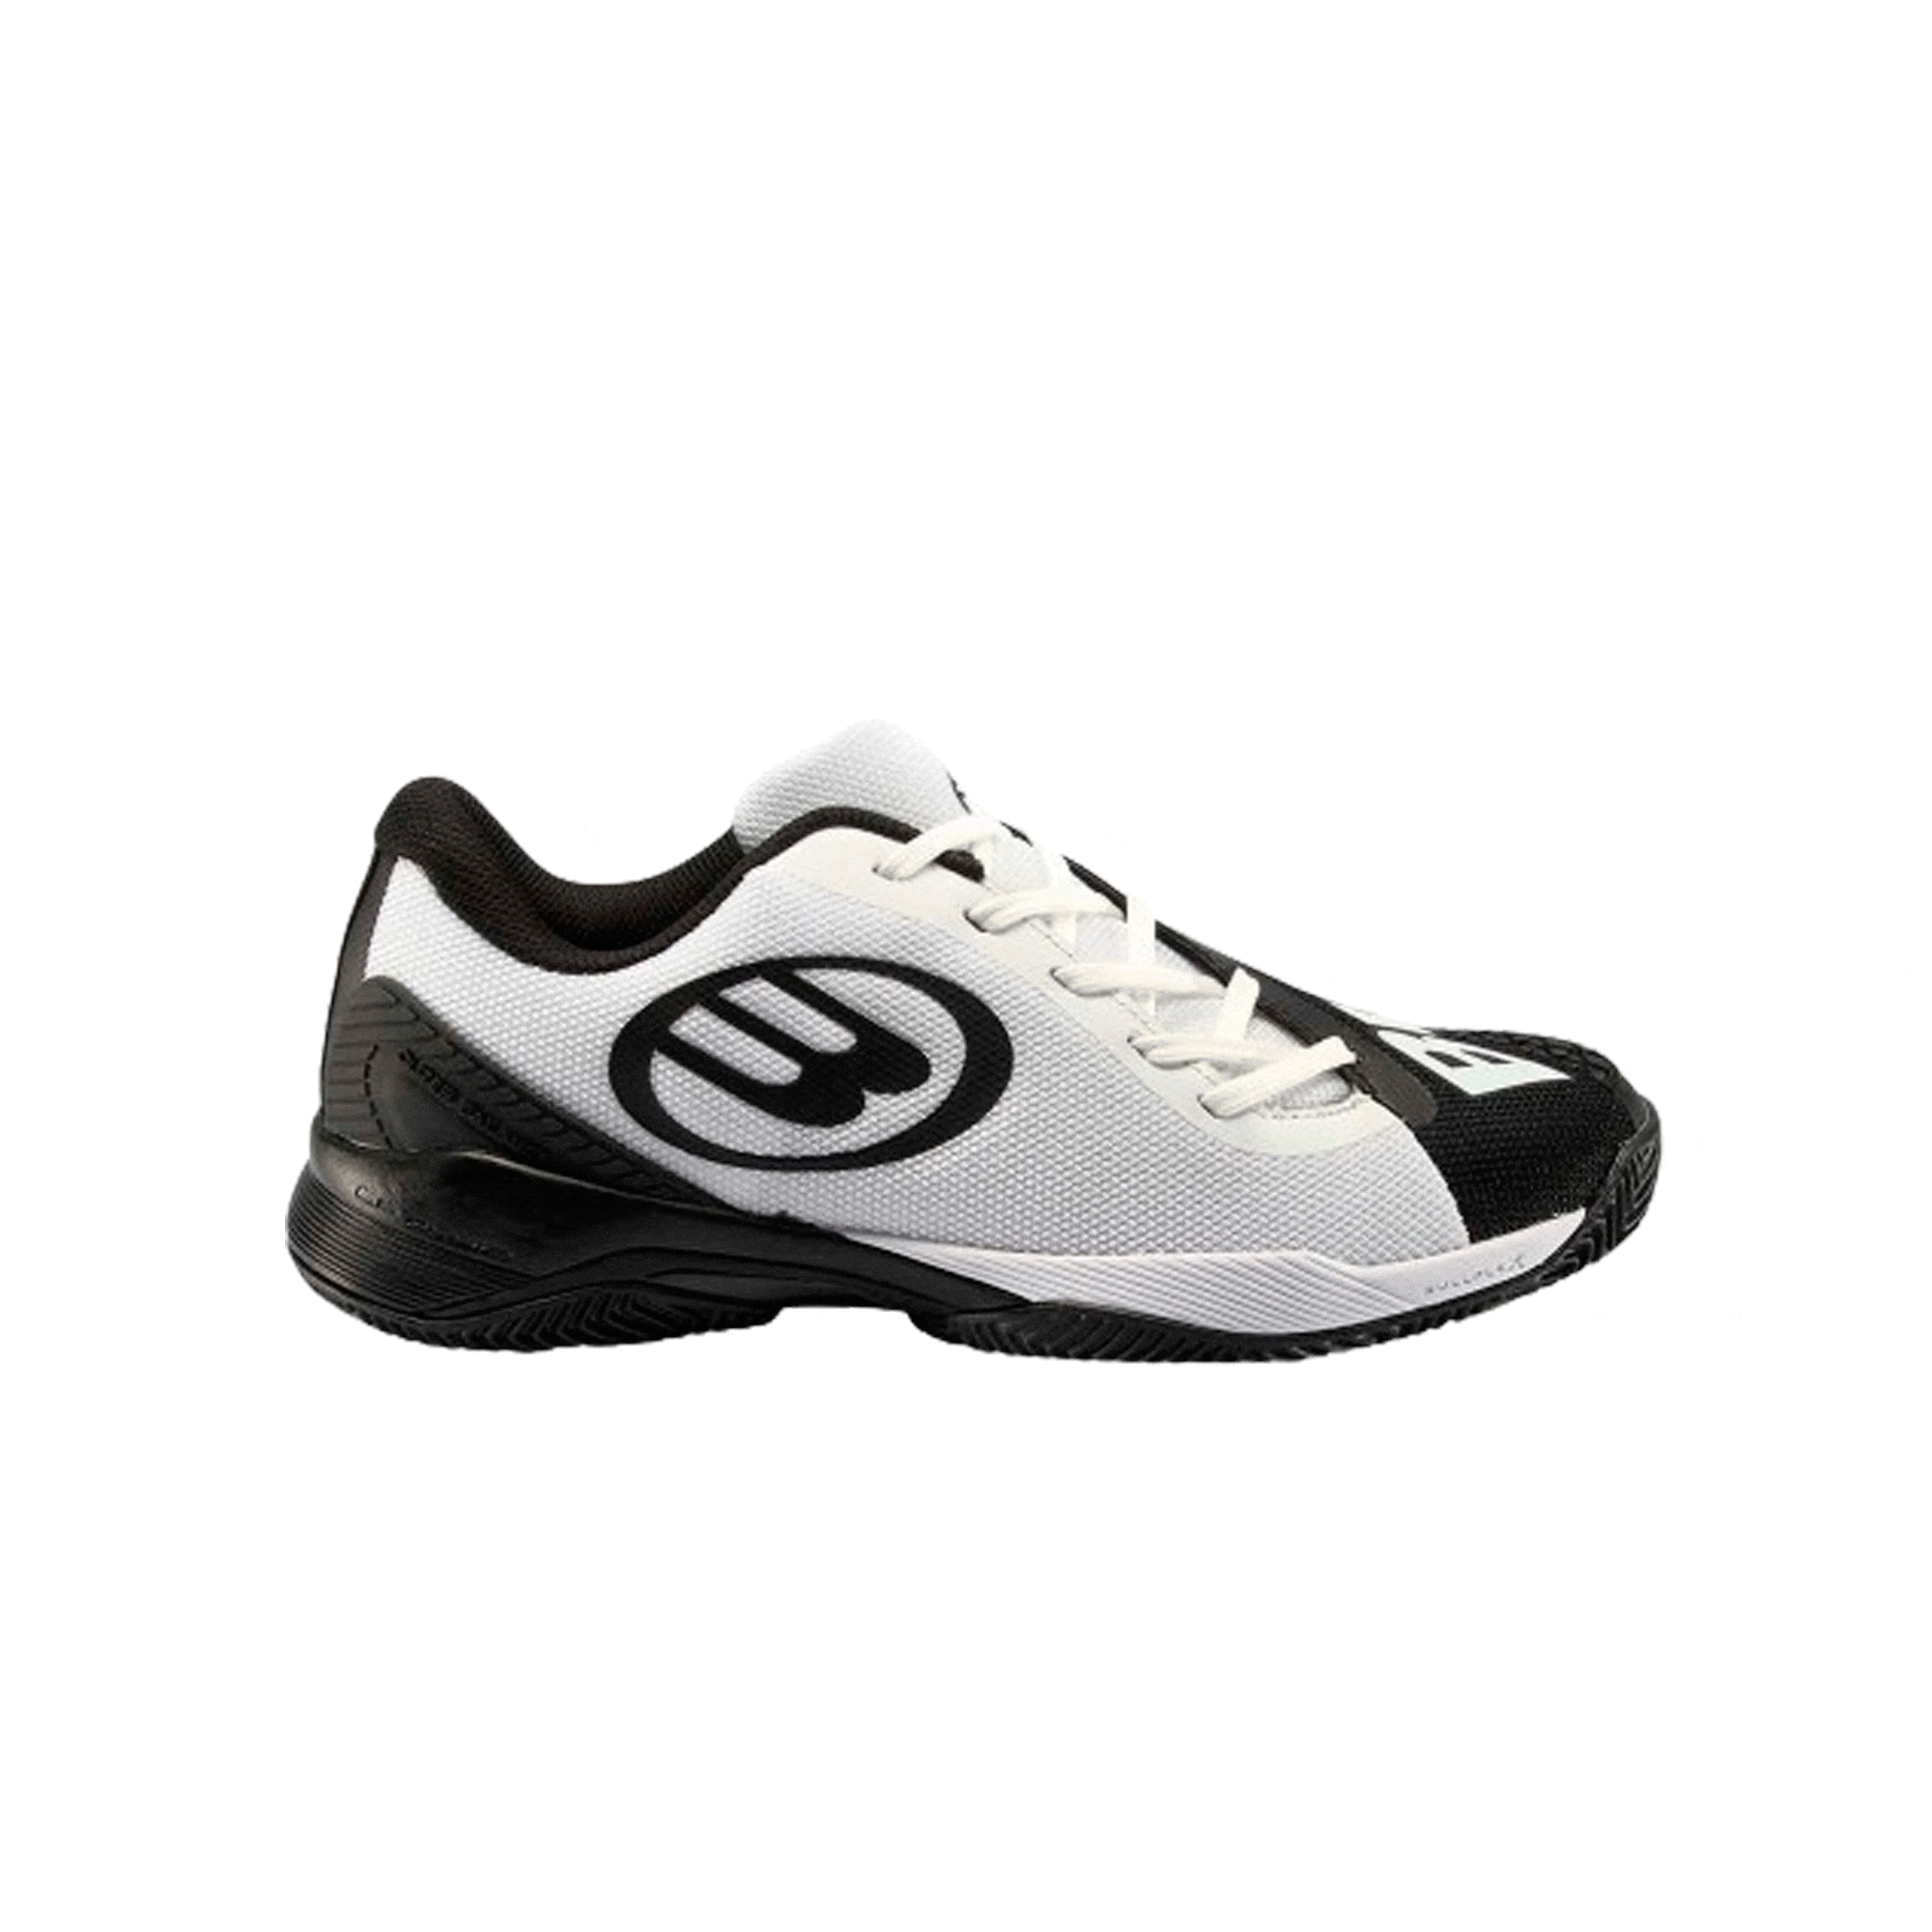 Category Padel Shoes